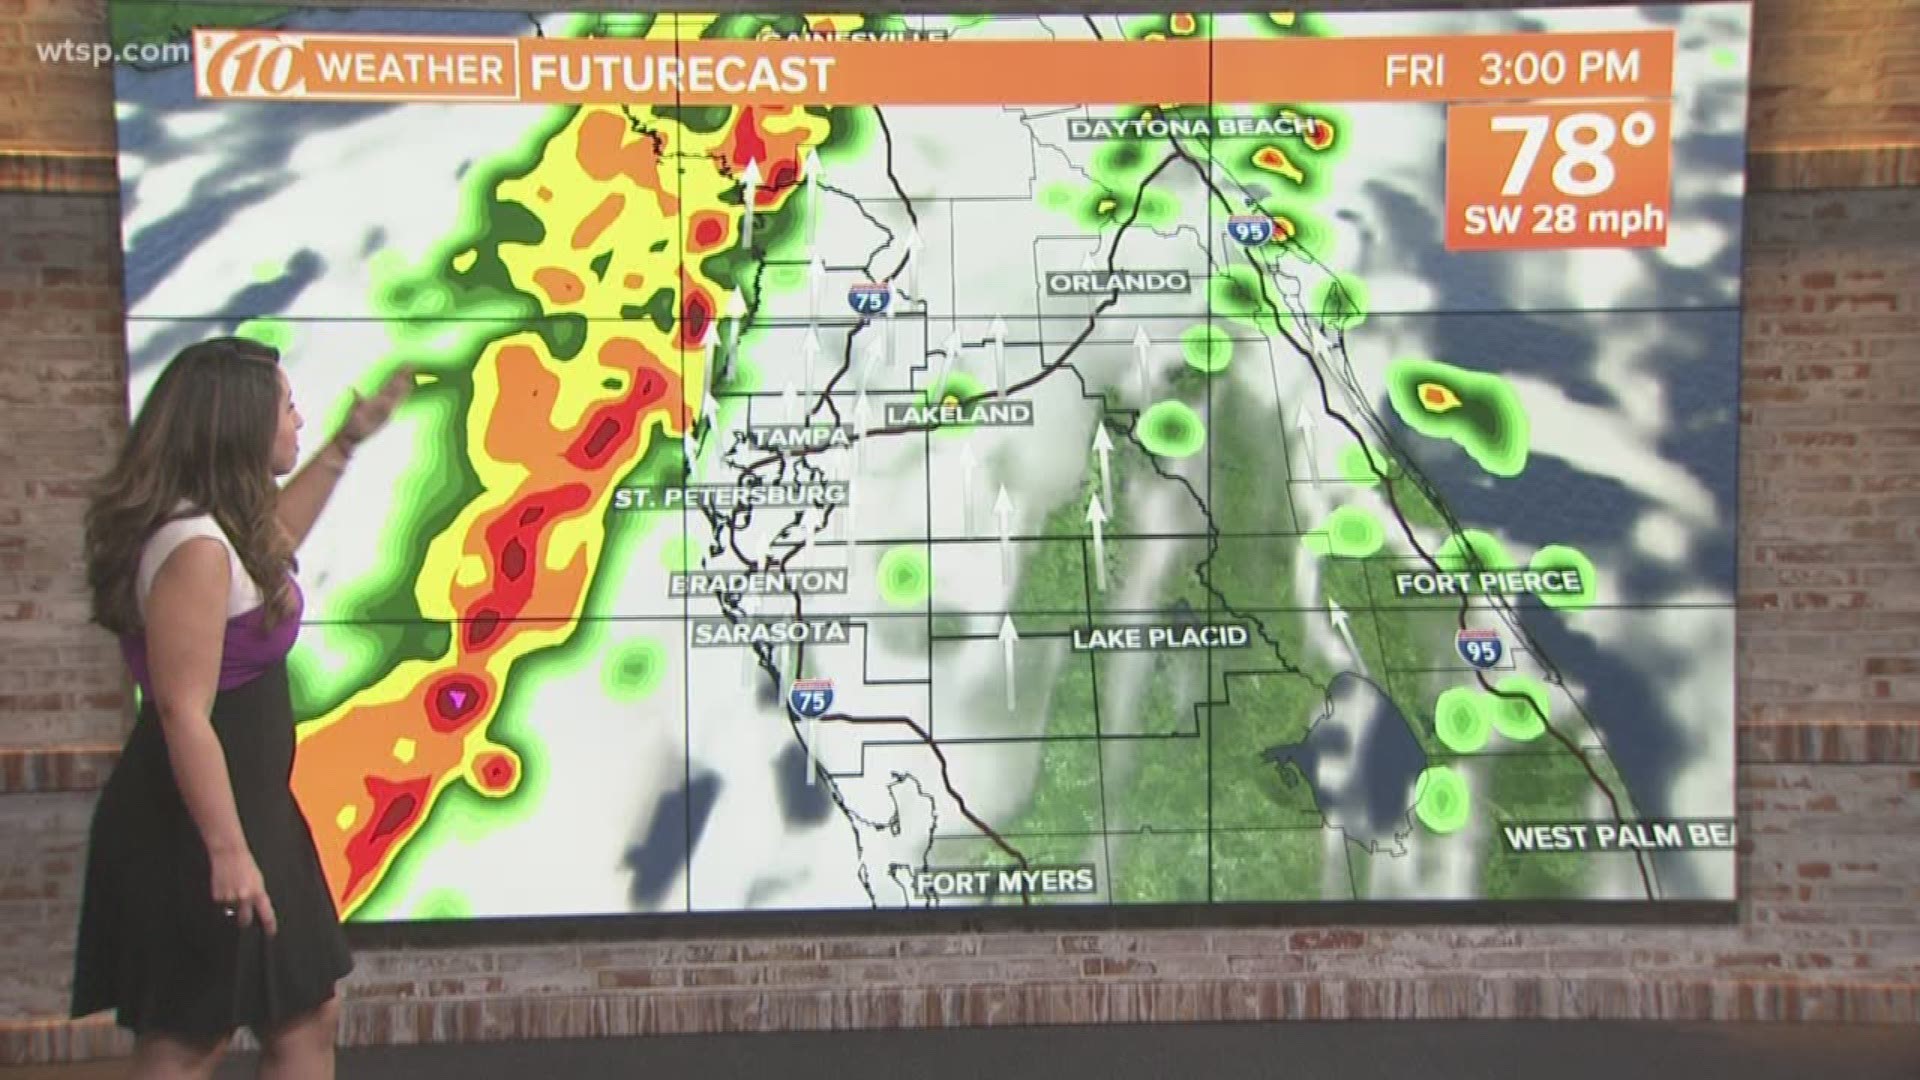 Strong to severe thunderstorms could roll across Florida to end the workweek.